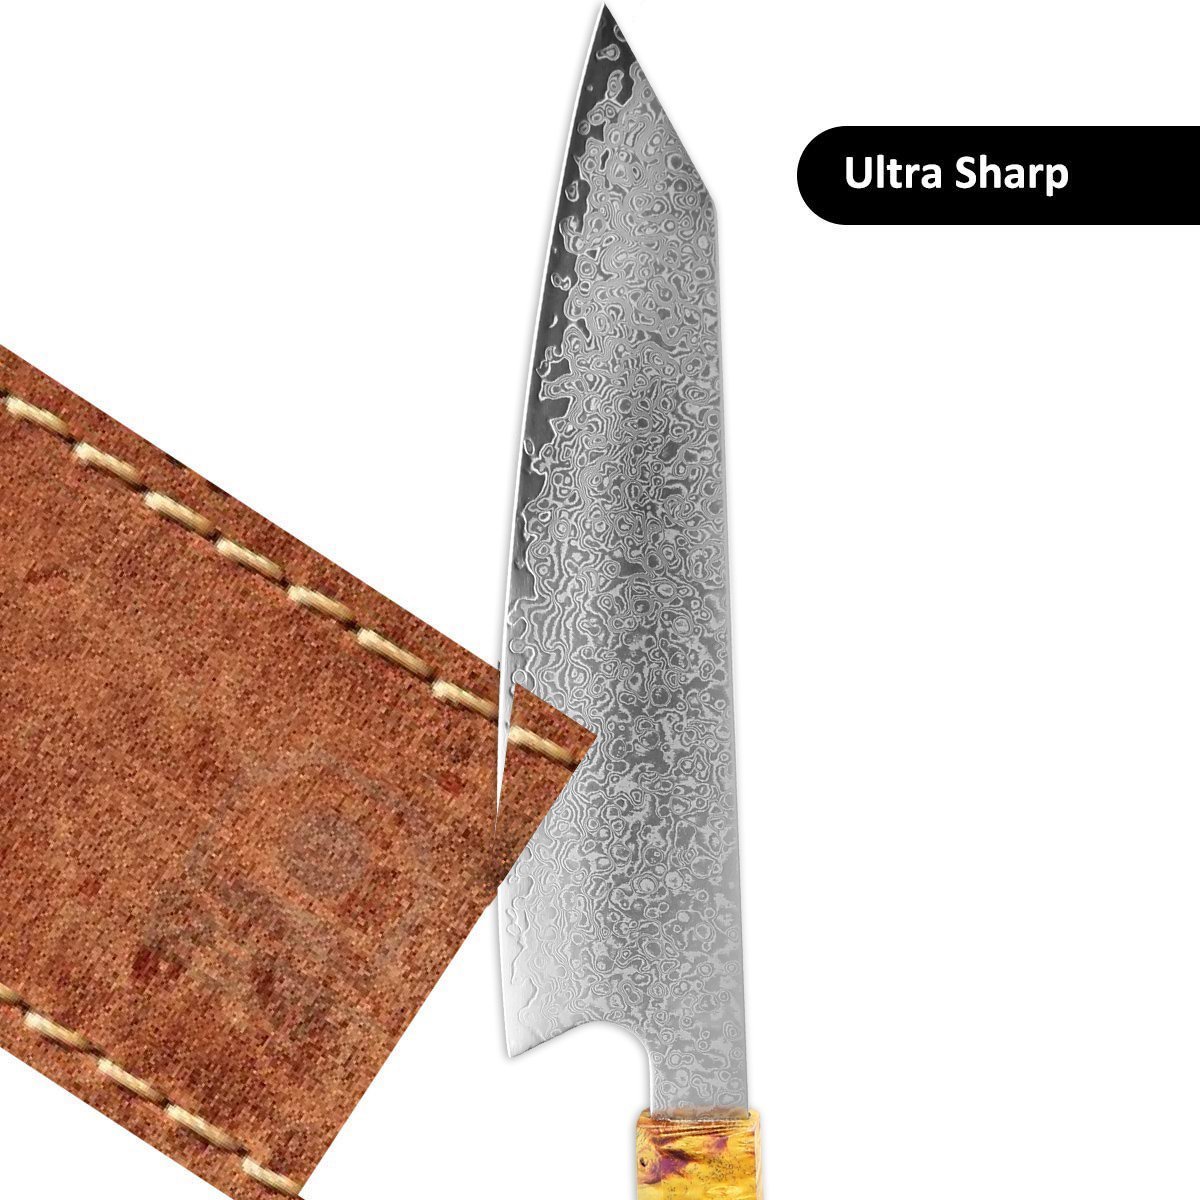 http://www.letcase.com/cdn/shop/products/japanese-damascus-kitchen-knives-8-inch-vg10-damascus-steel-chef-knife-982867_1200x1200.jpg?v=1597025396